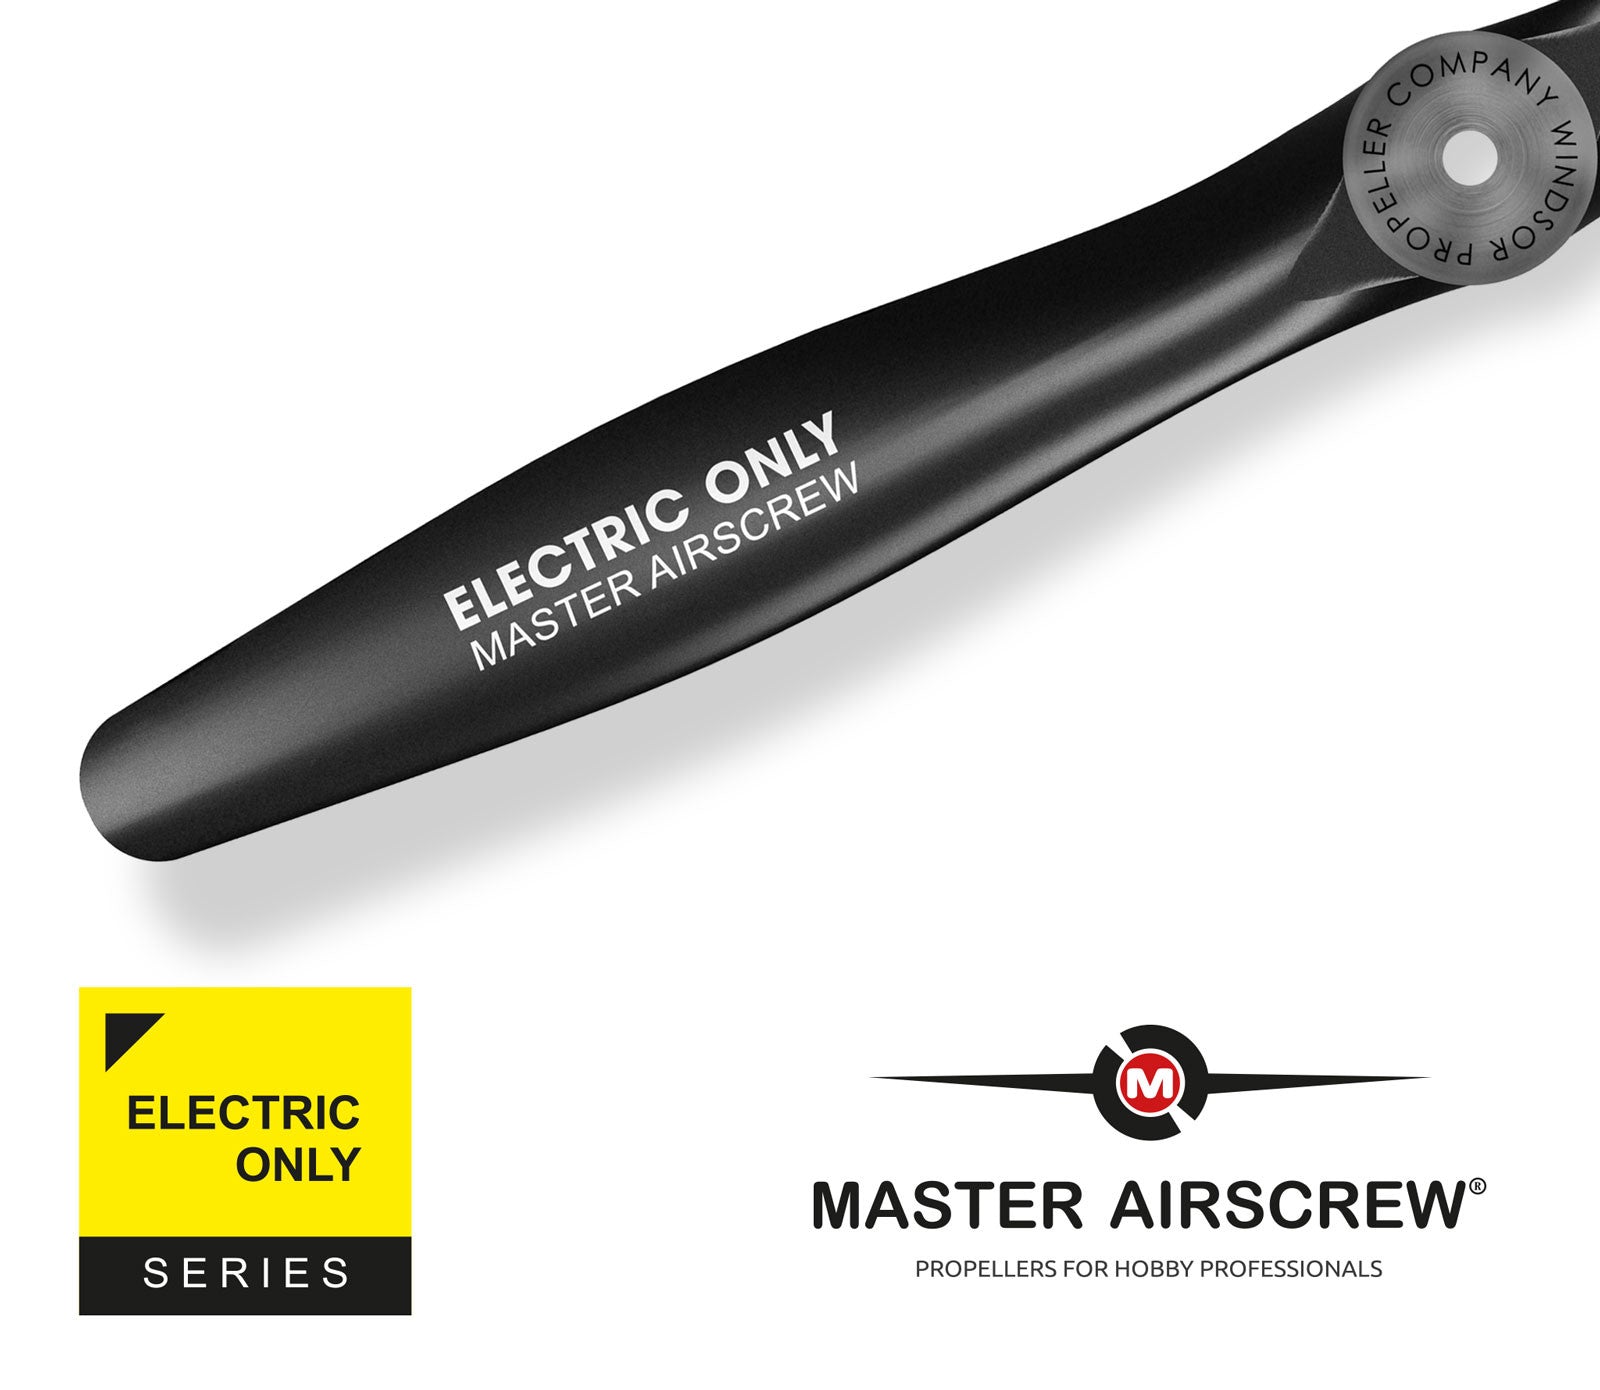 Electric Only - 8x5 Propeller - Master Airscrew